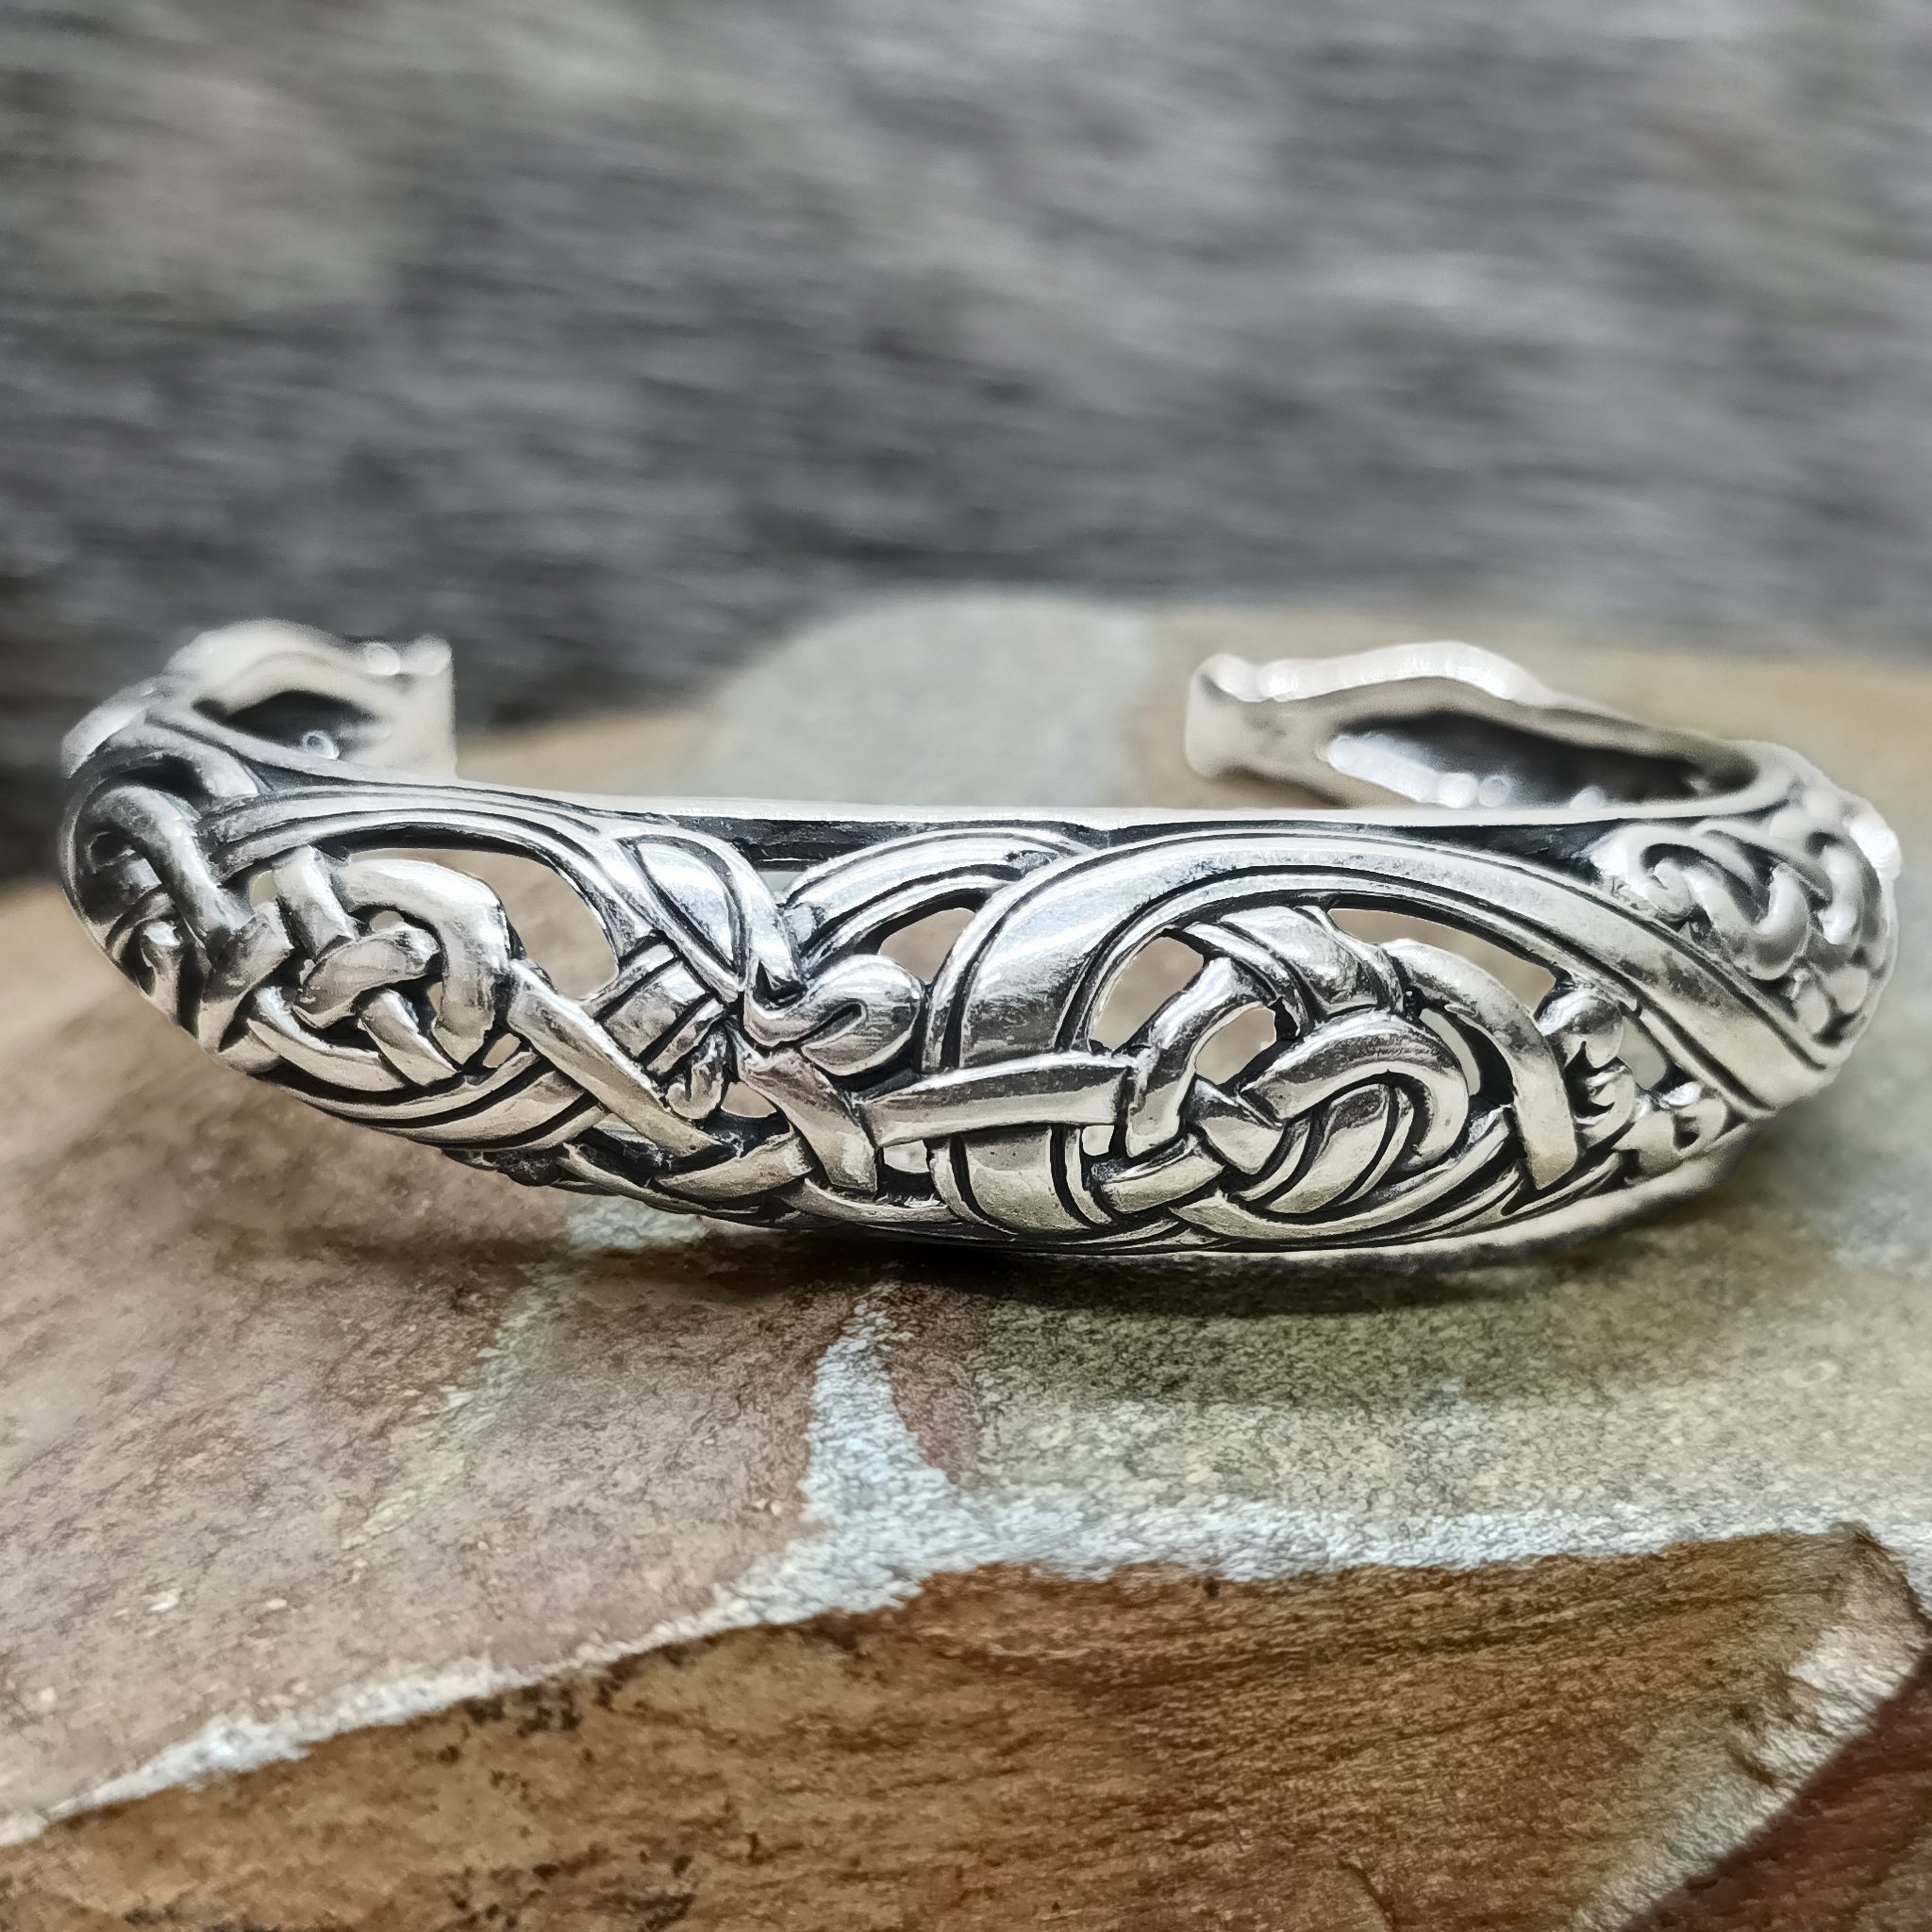 Viking Style Cuff How To - YouTube